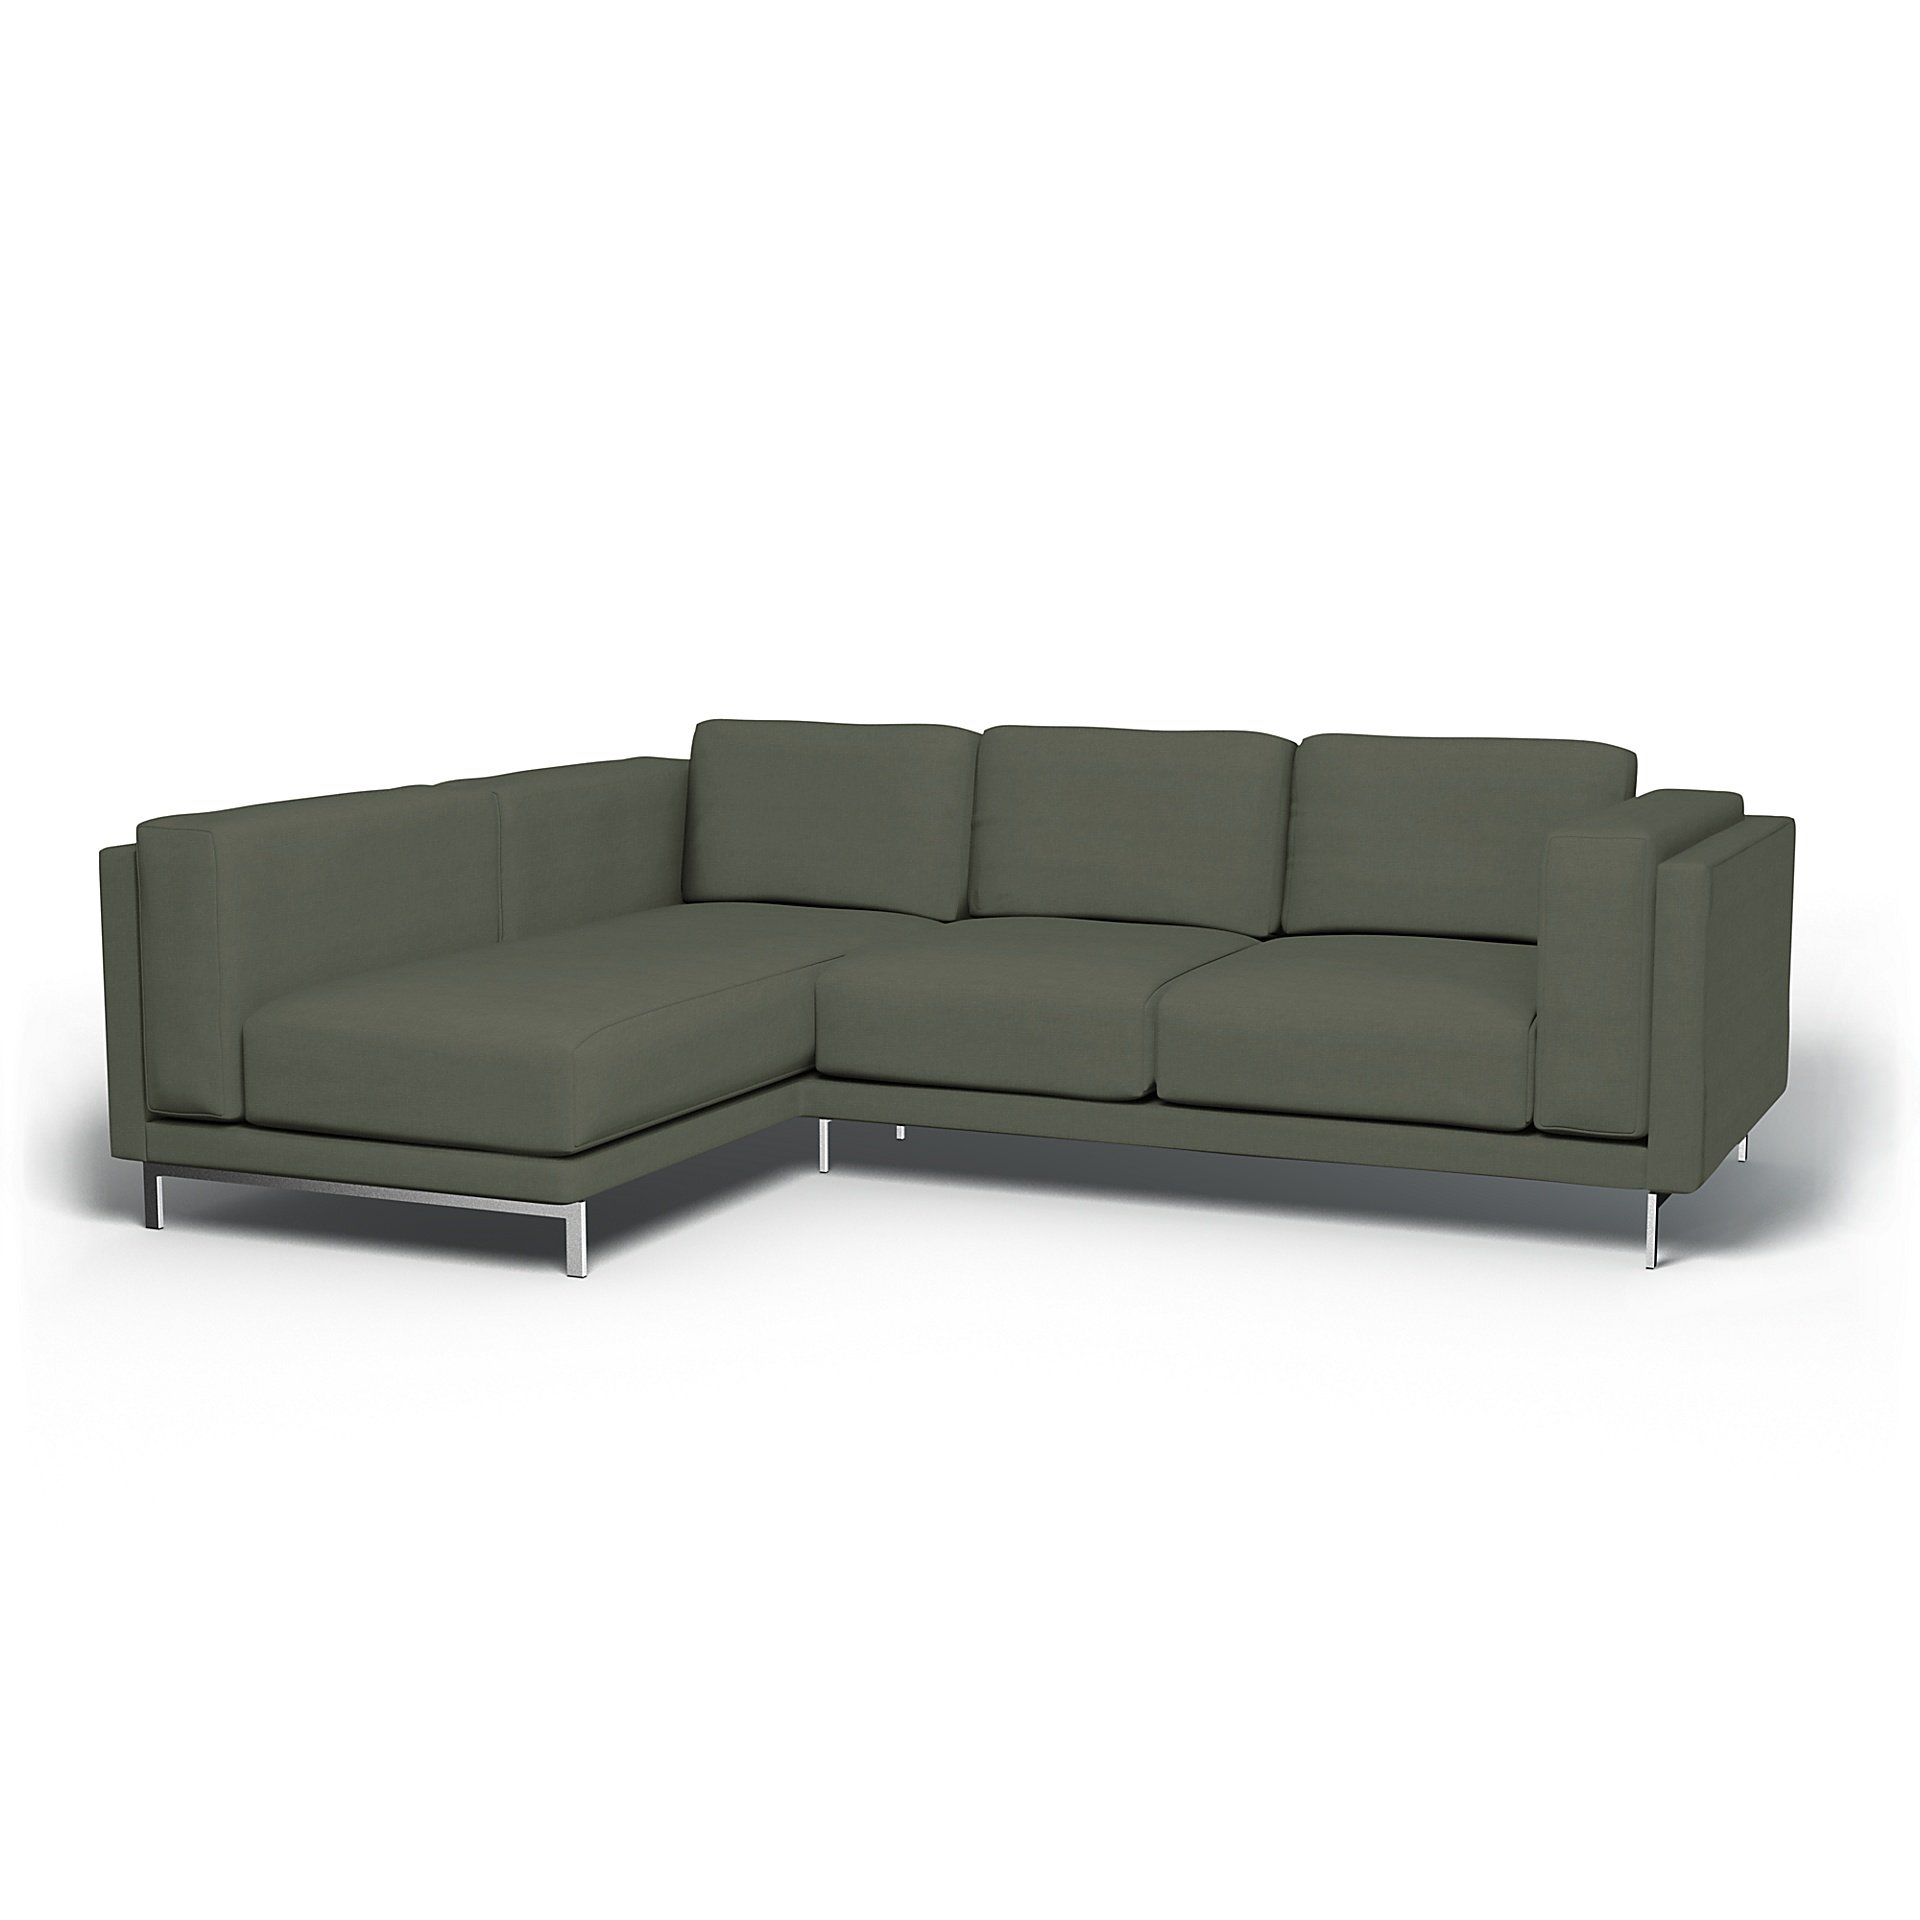 IKEA - Nockeby 3 Seater Sofa with Left Chaise Cover, Rosemary, Linen - Bemz